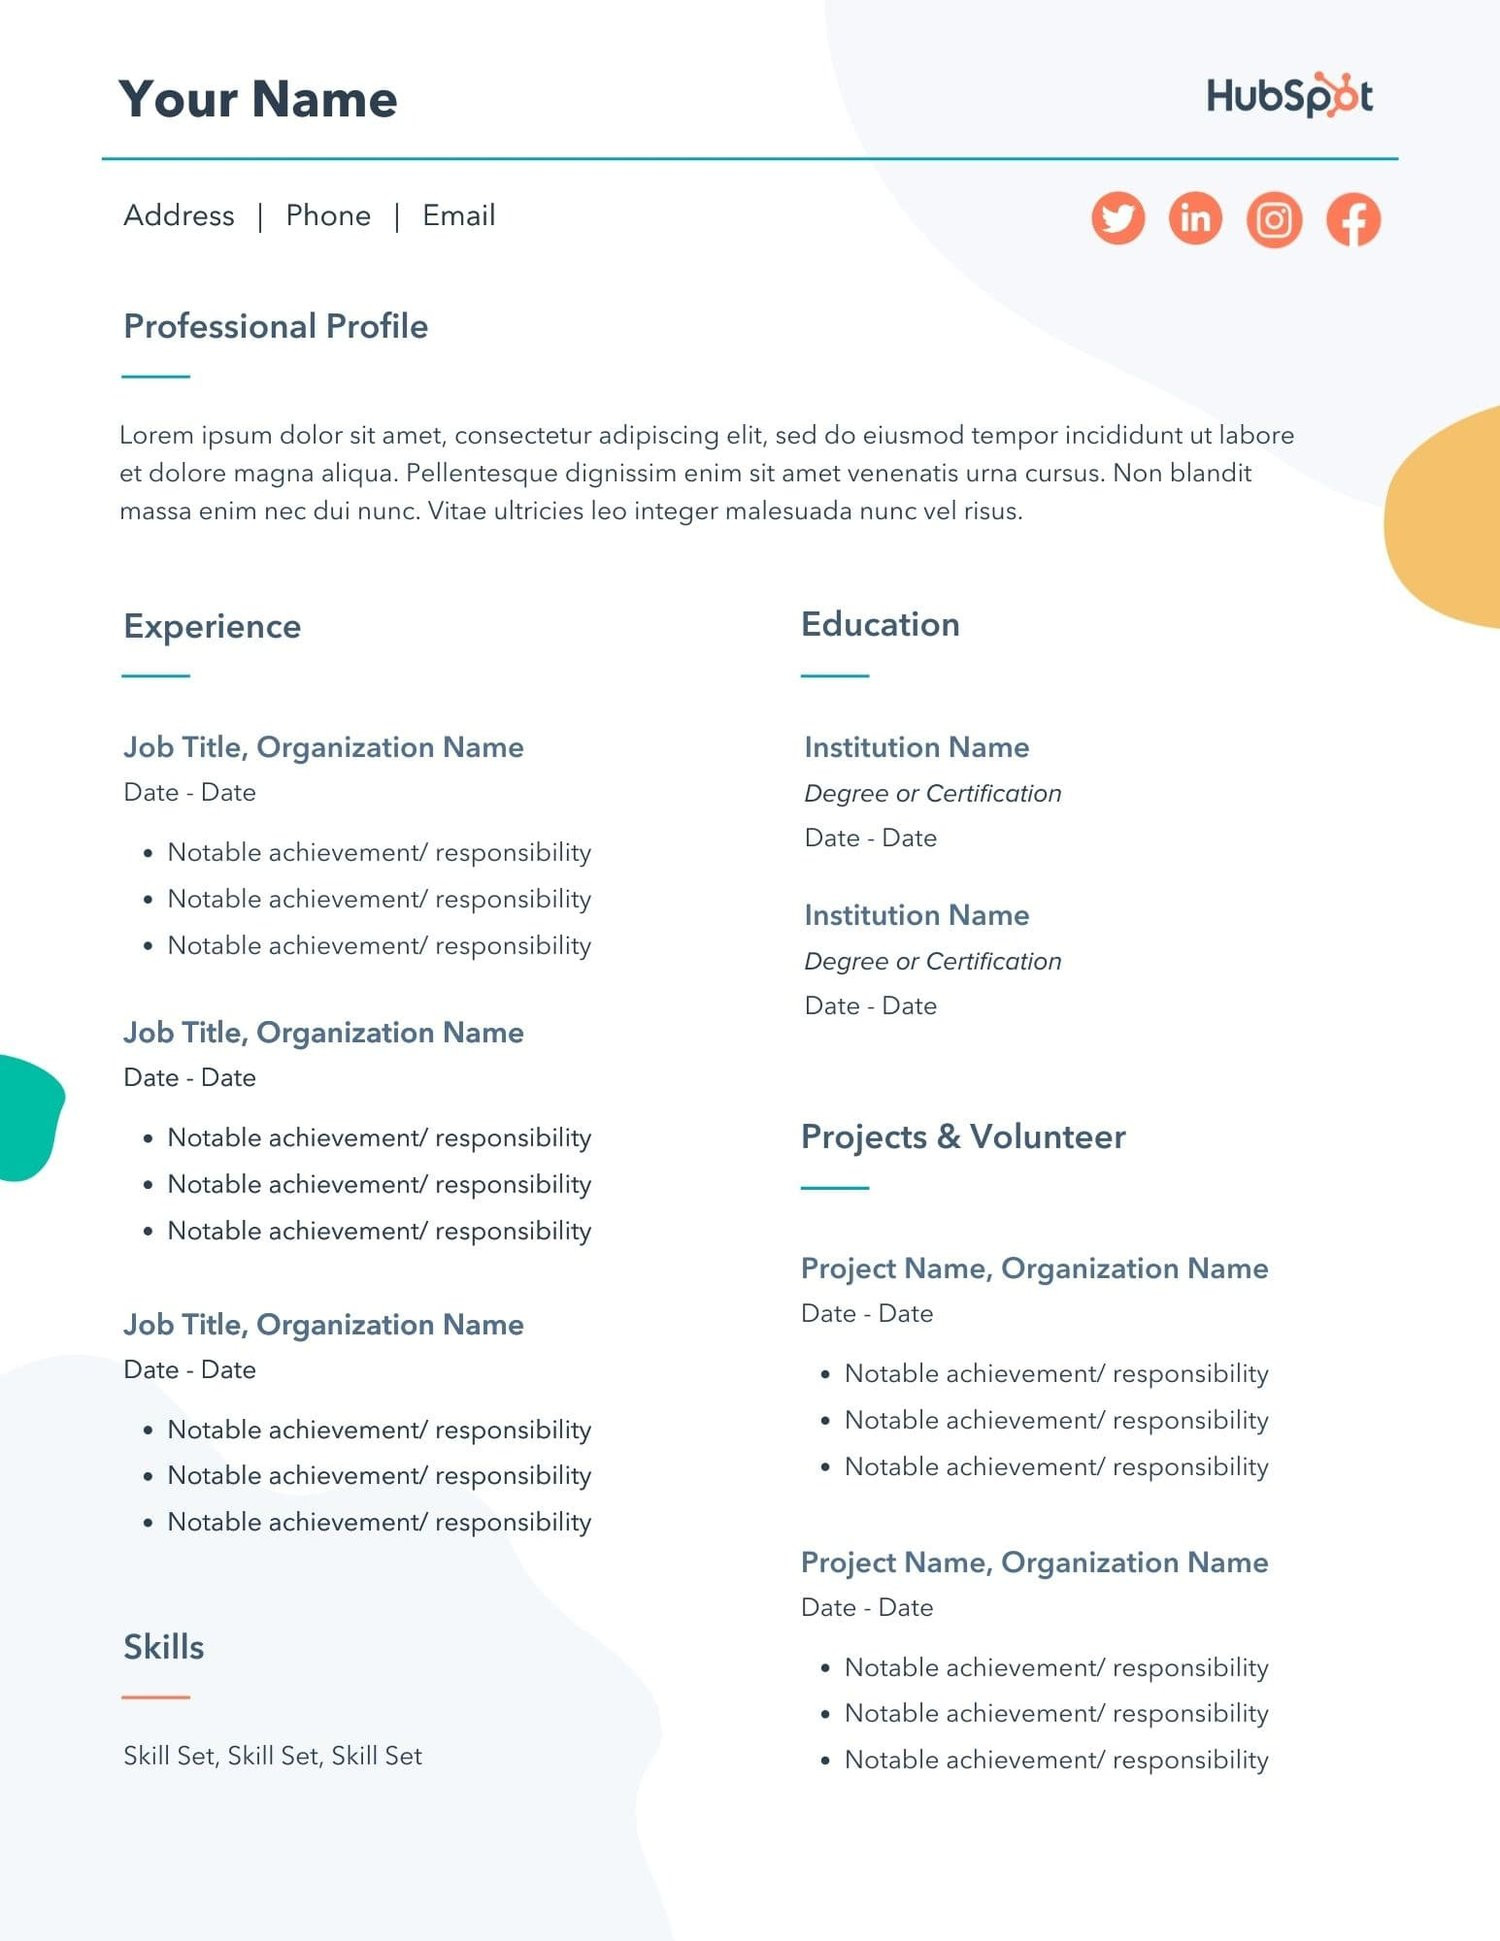 Sample Resume with Header and Footer 29 Free Resume Templates for Microsoft Word (& How to Make Your Own)